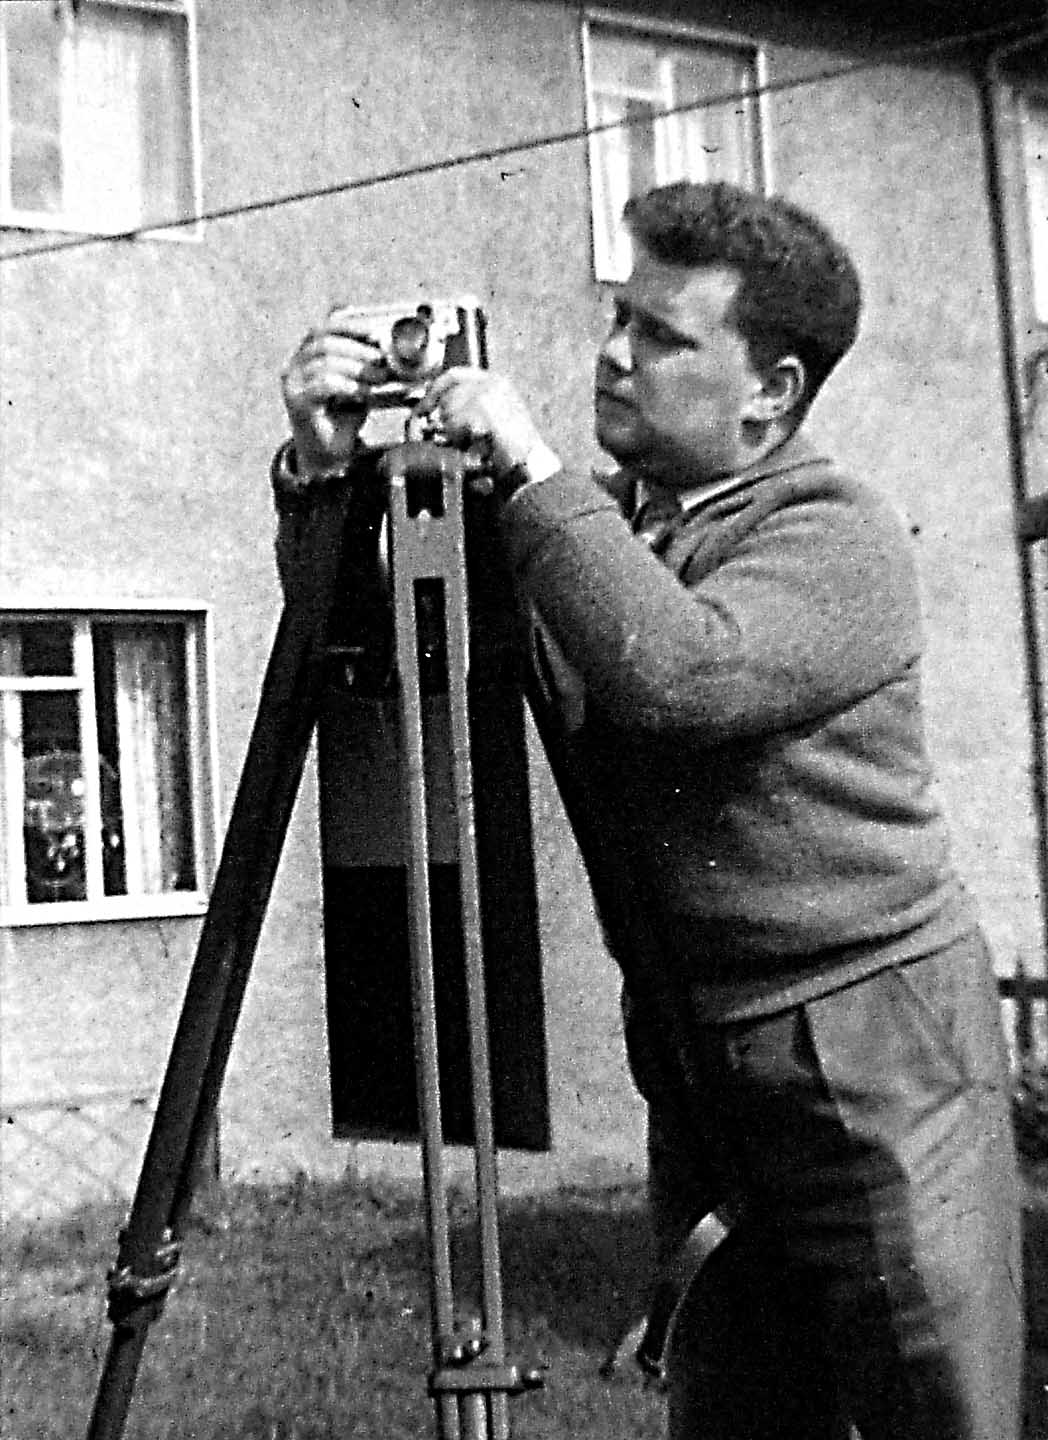 Harry Ford in late 1950s prepares his camera for night photography